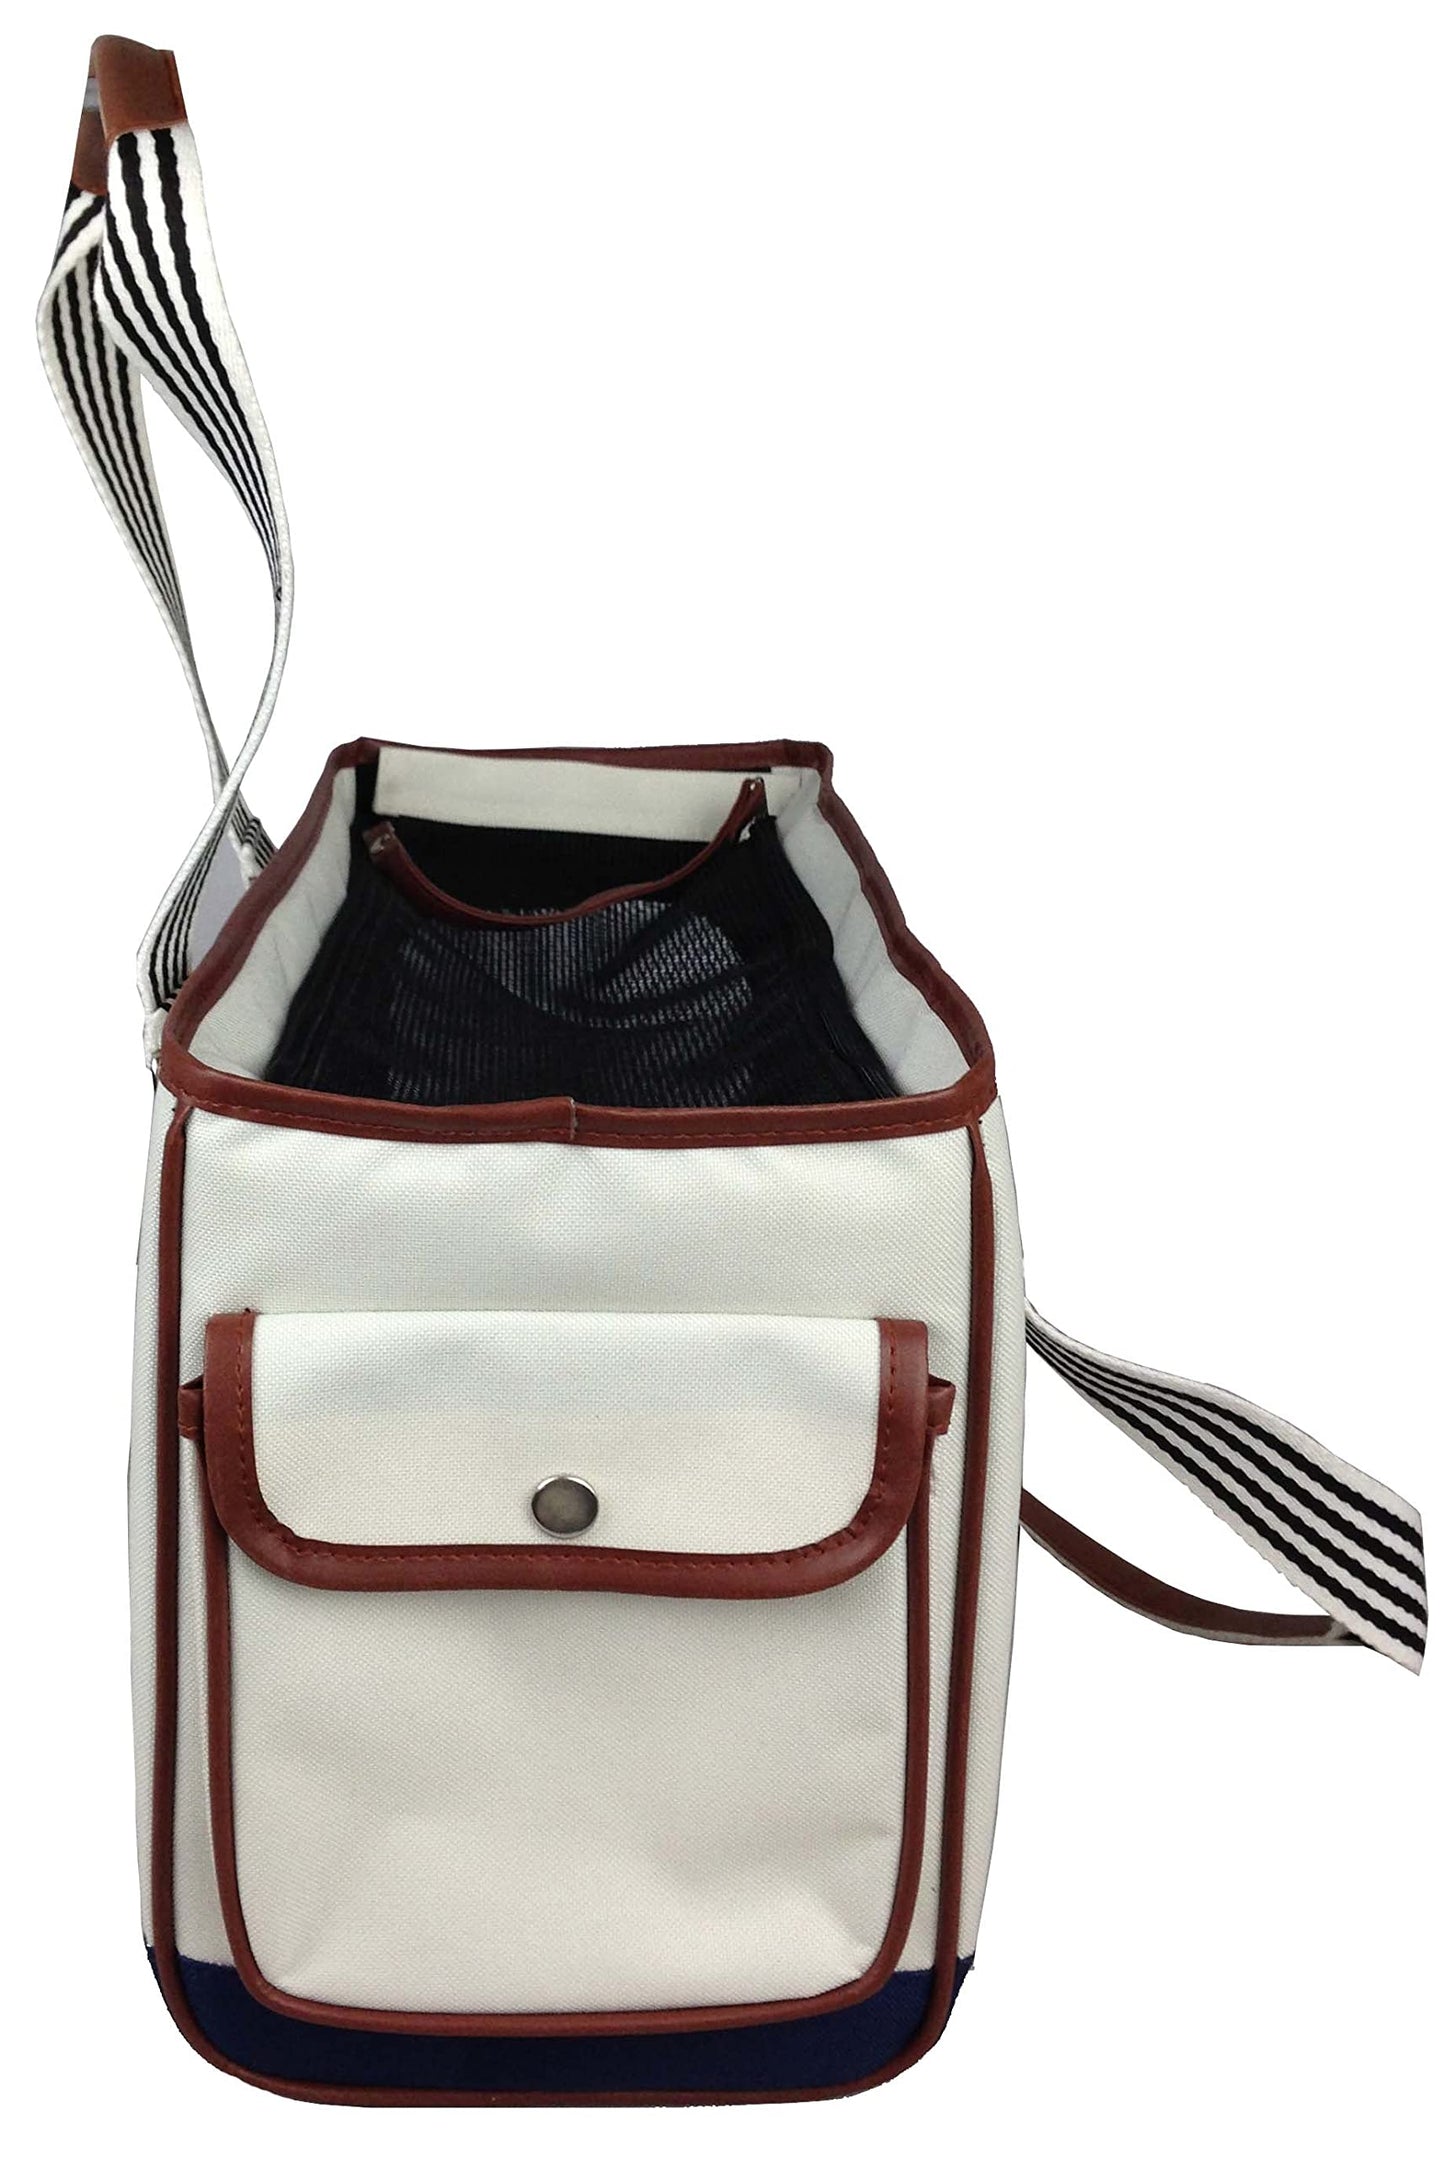 Yacht Polo Fashion Dog Carrier - Trendy Dog Boutique